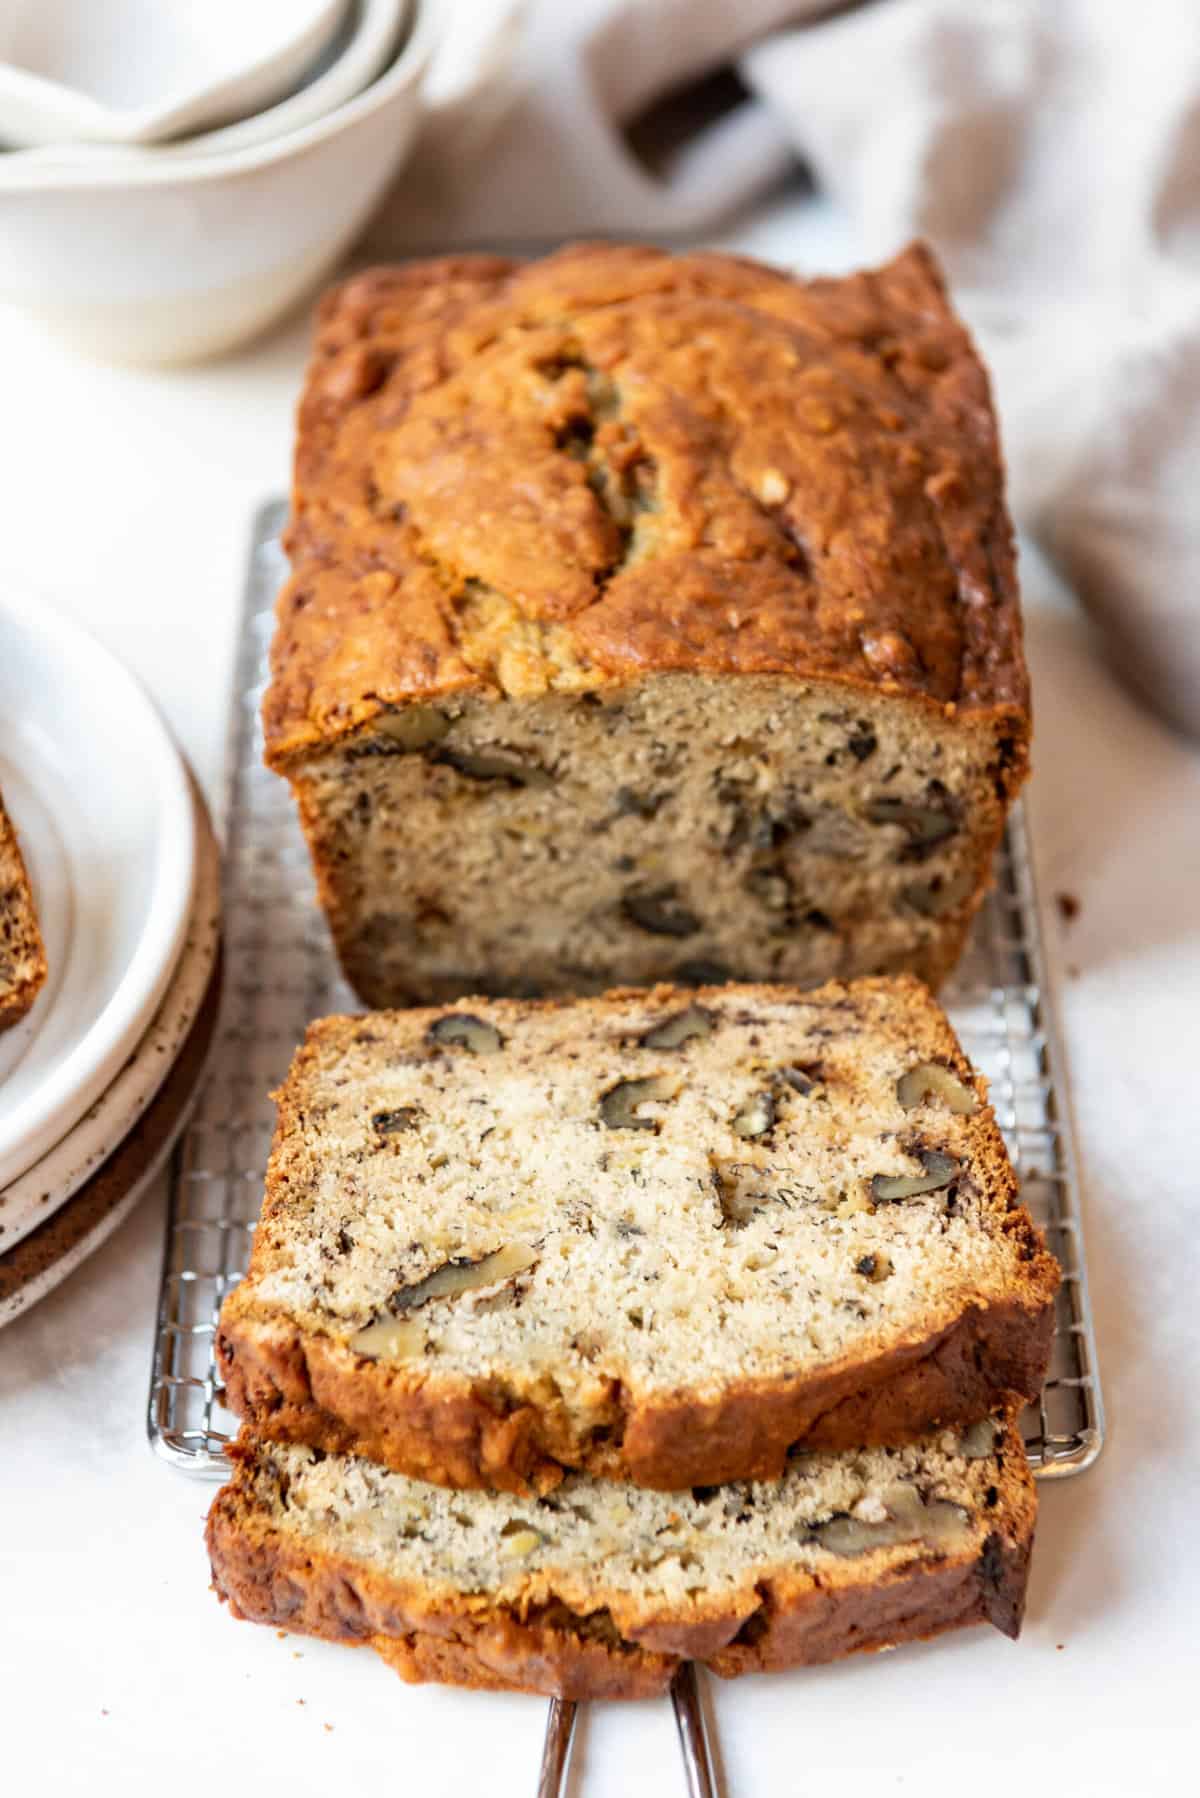 Two slices of banana bread in front of the rest of the loaf.